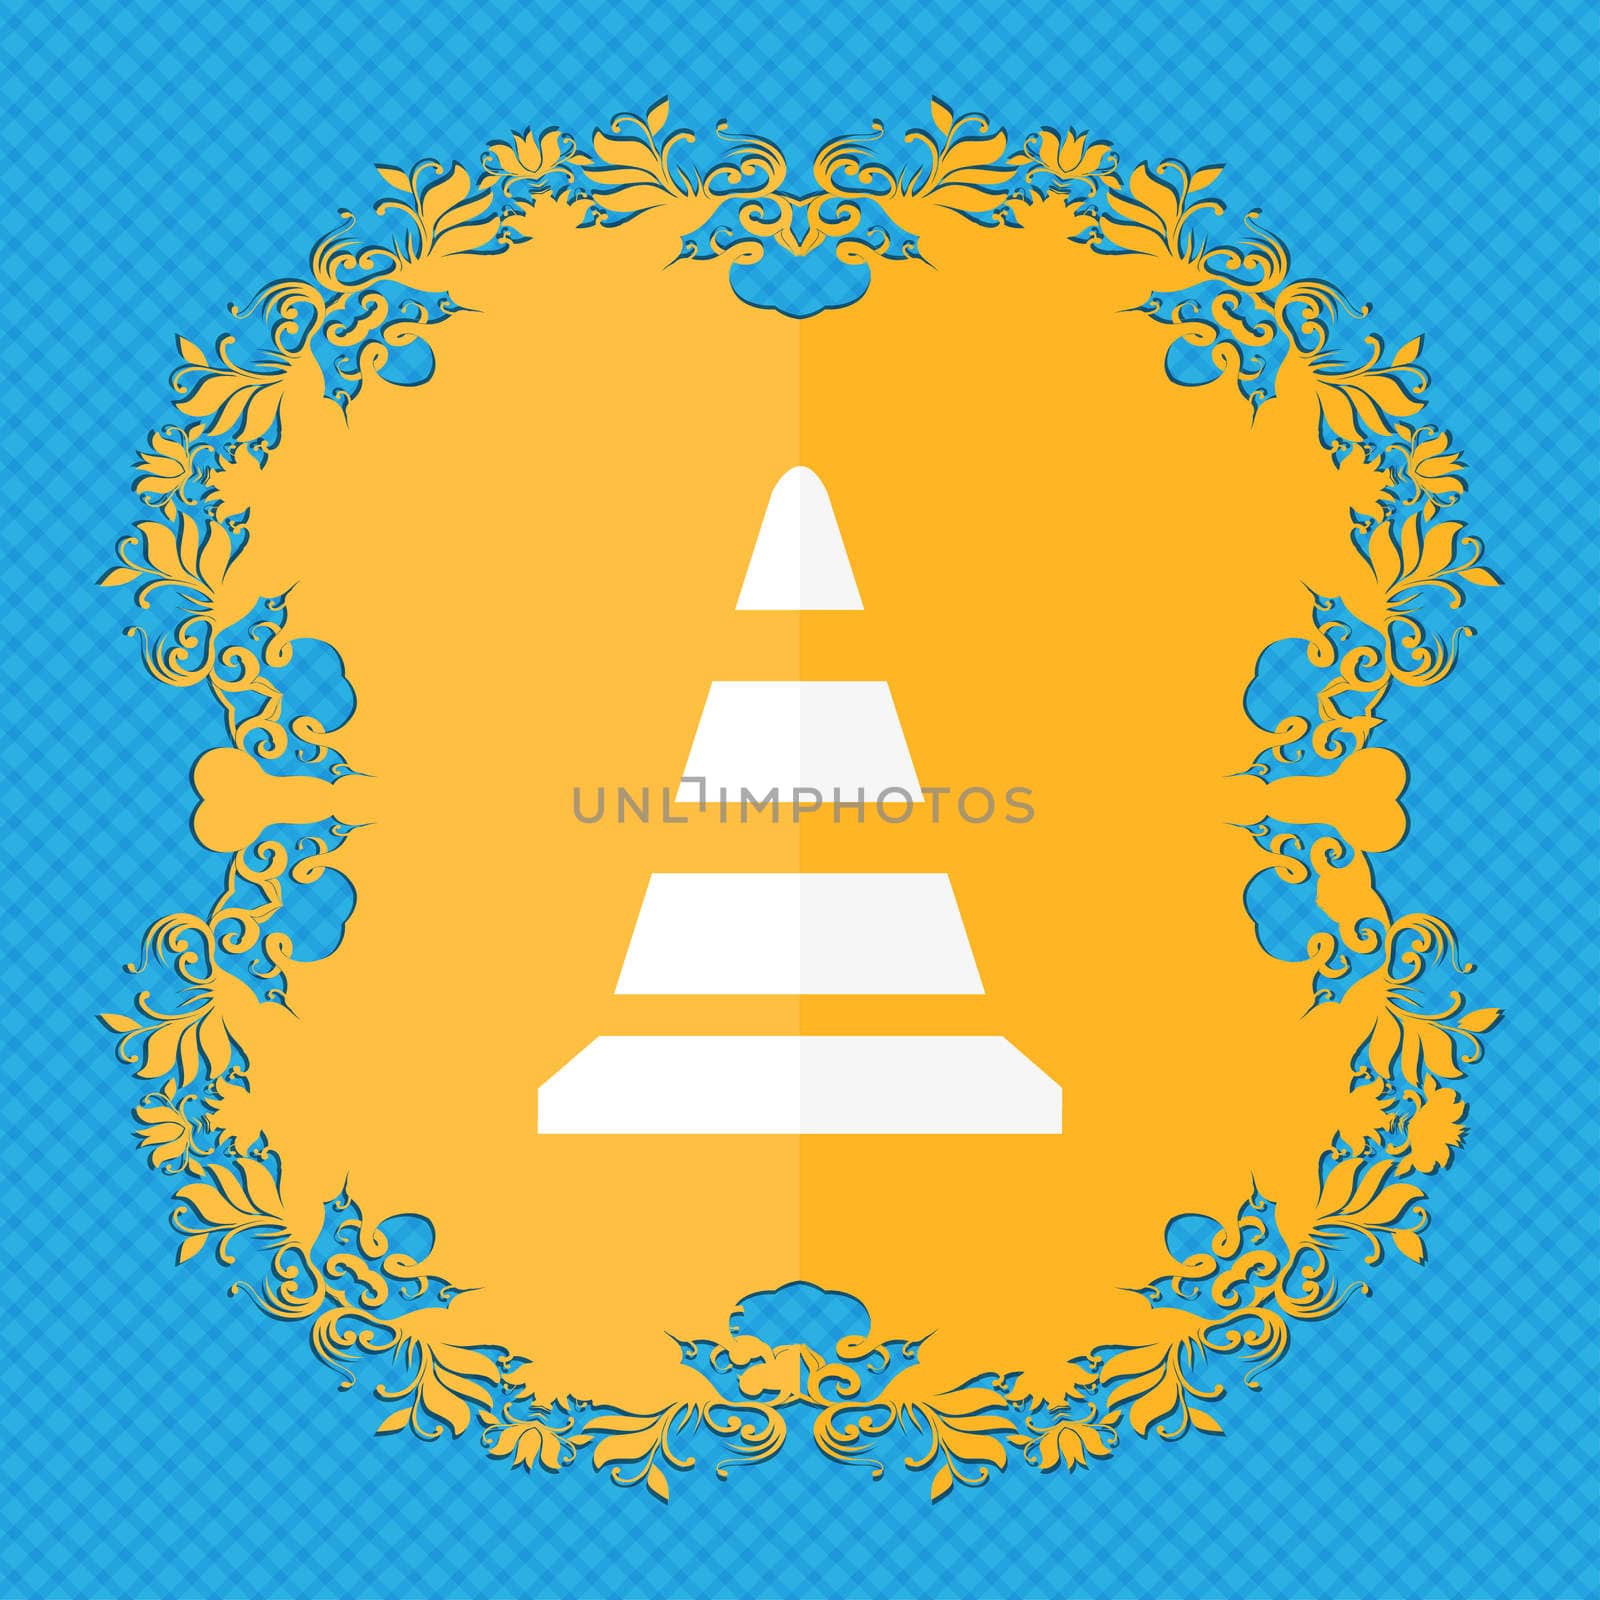 road cone icon. Floral flat design on a blue abstract background with place for your text. illustration